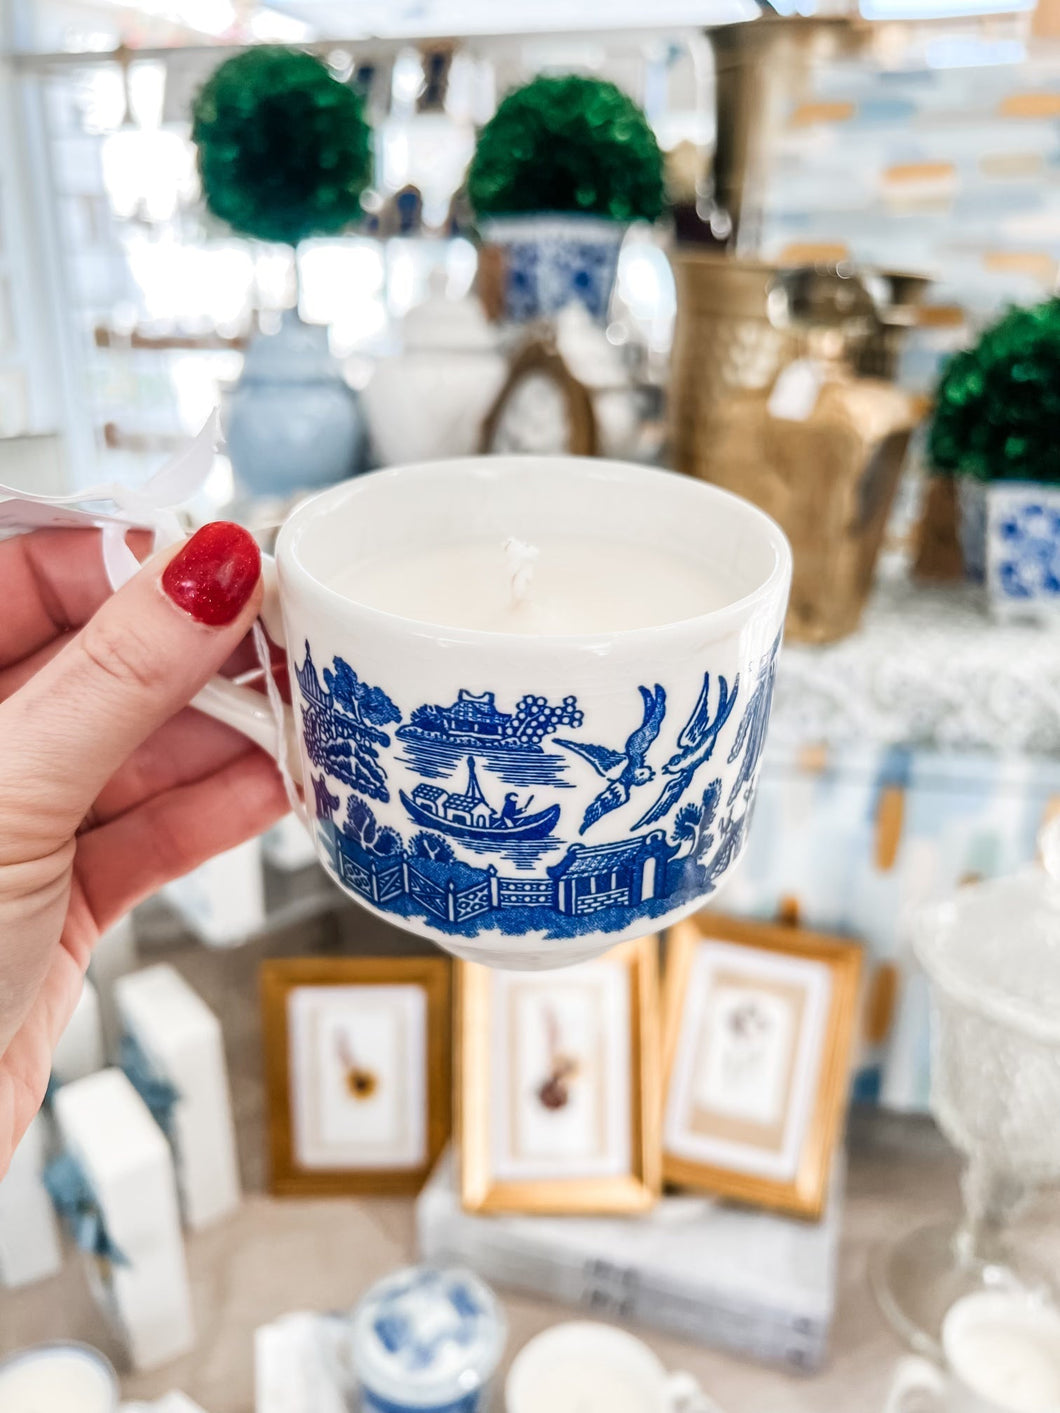 The Heart of a Lion Blue and White Tea Cup scented candle-Belle Reve Designs by Megan Gatte